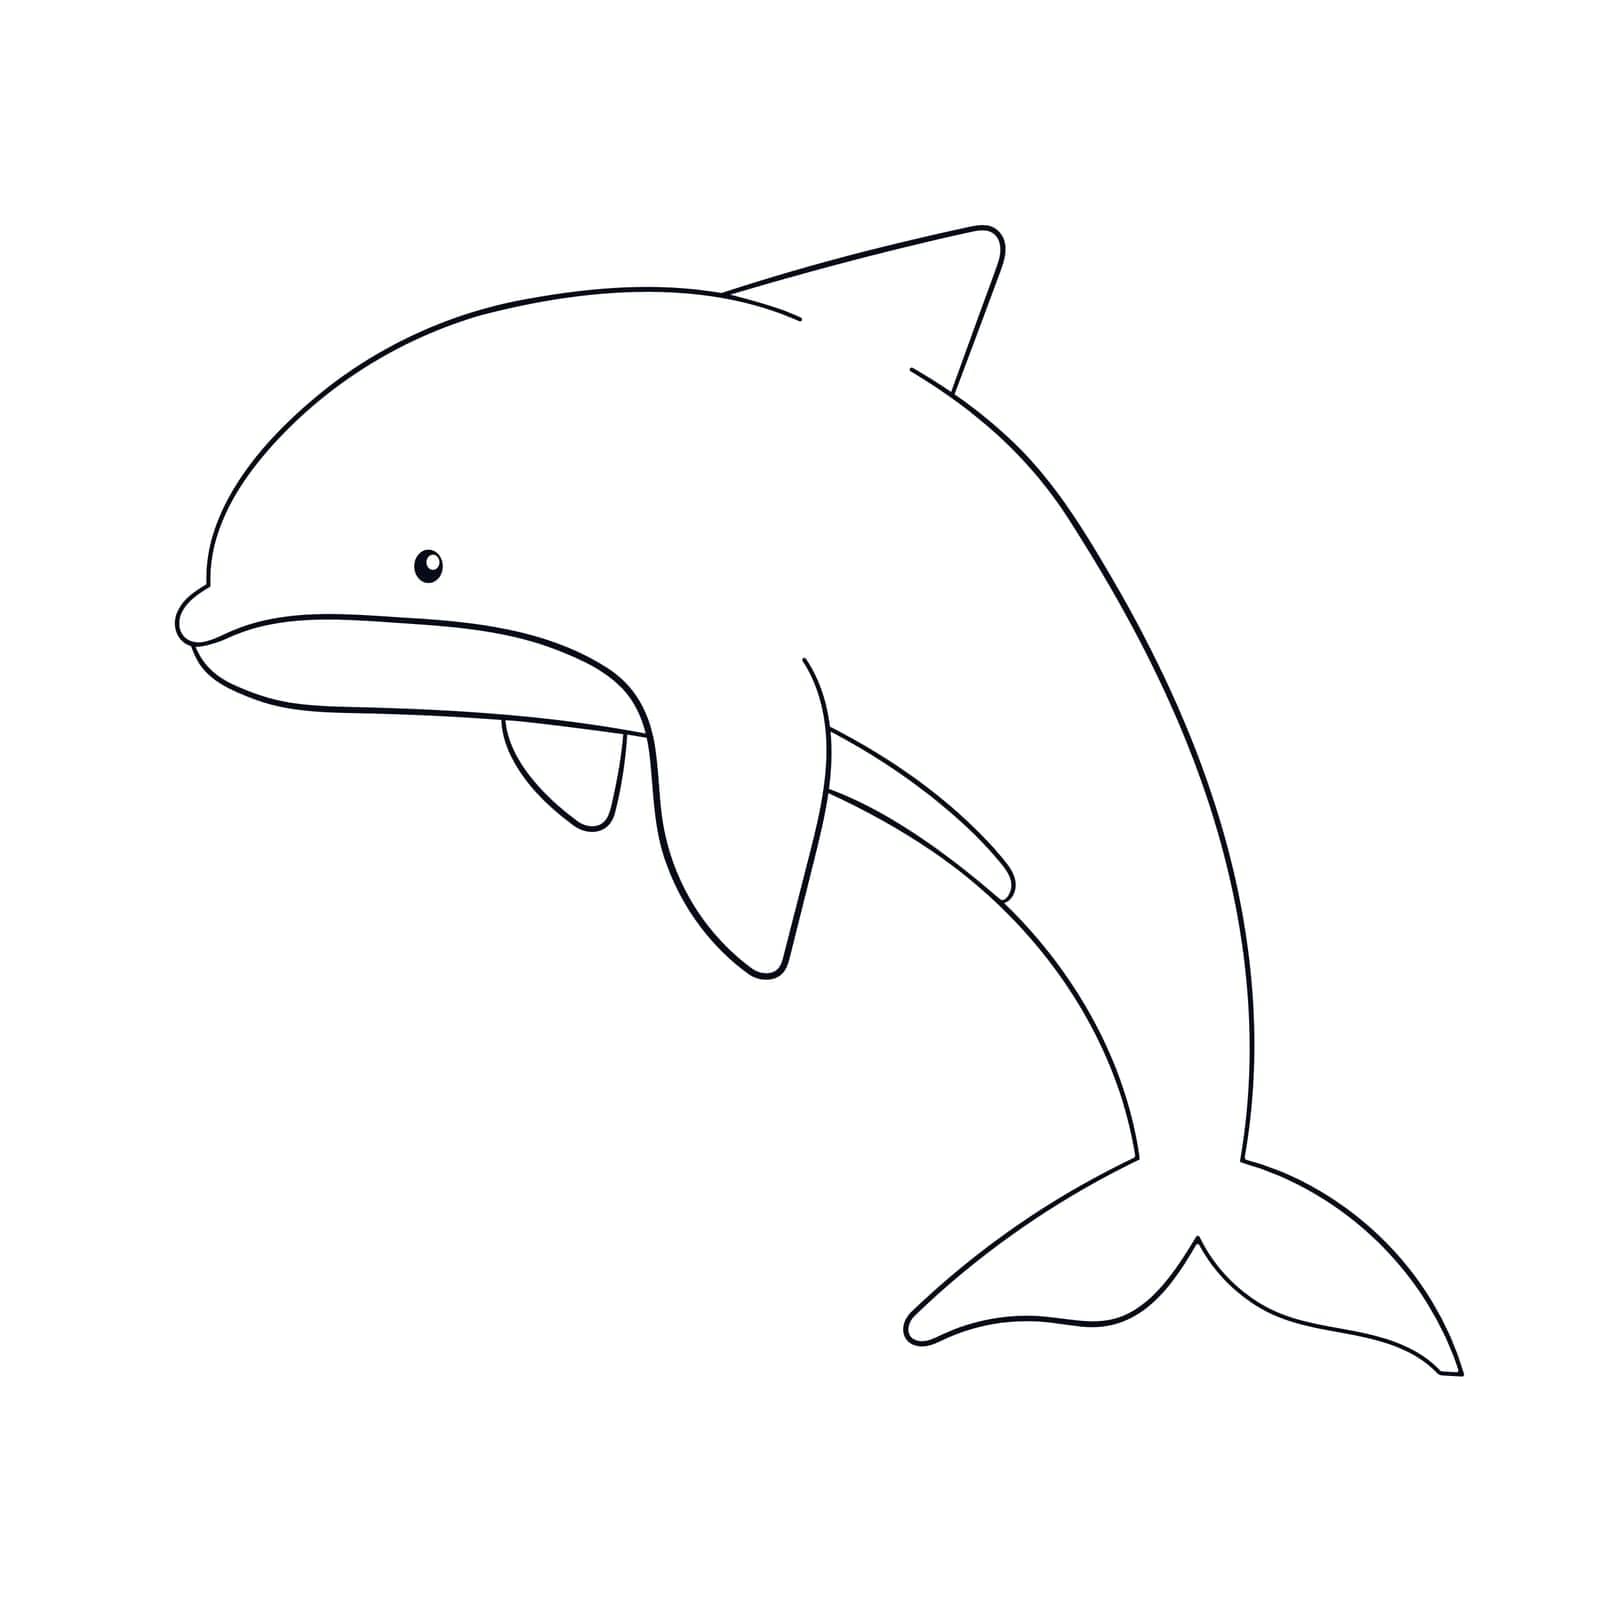 Dolphin in line art style. Hand drawn silhouette of a underwater mammal animal. Vector illustration isolated on white background.